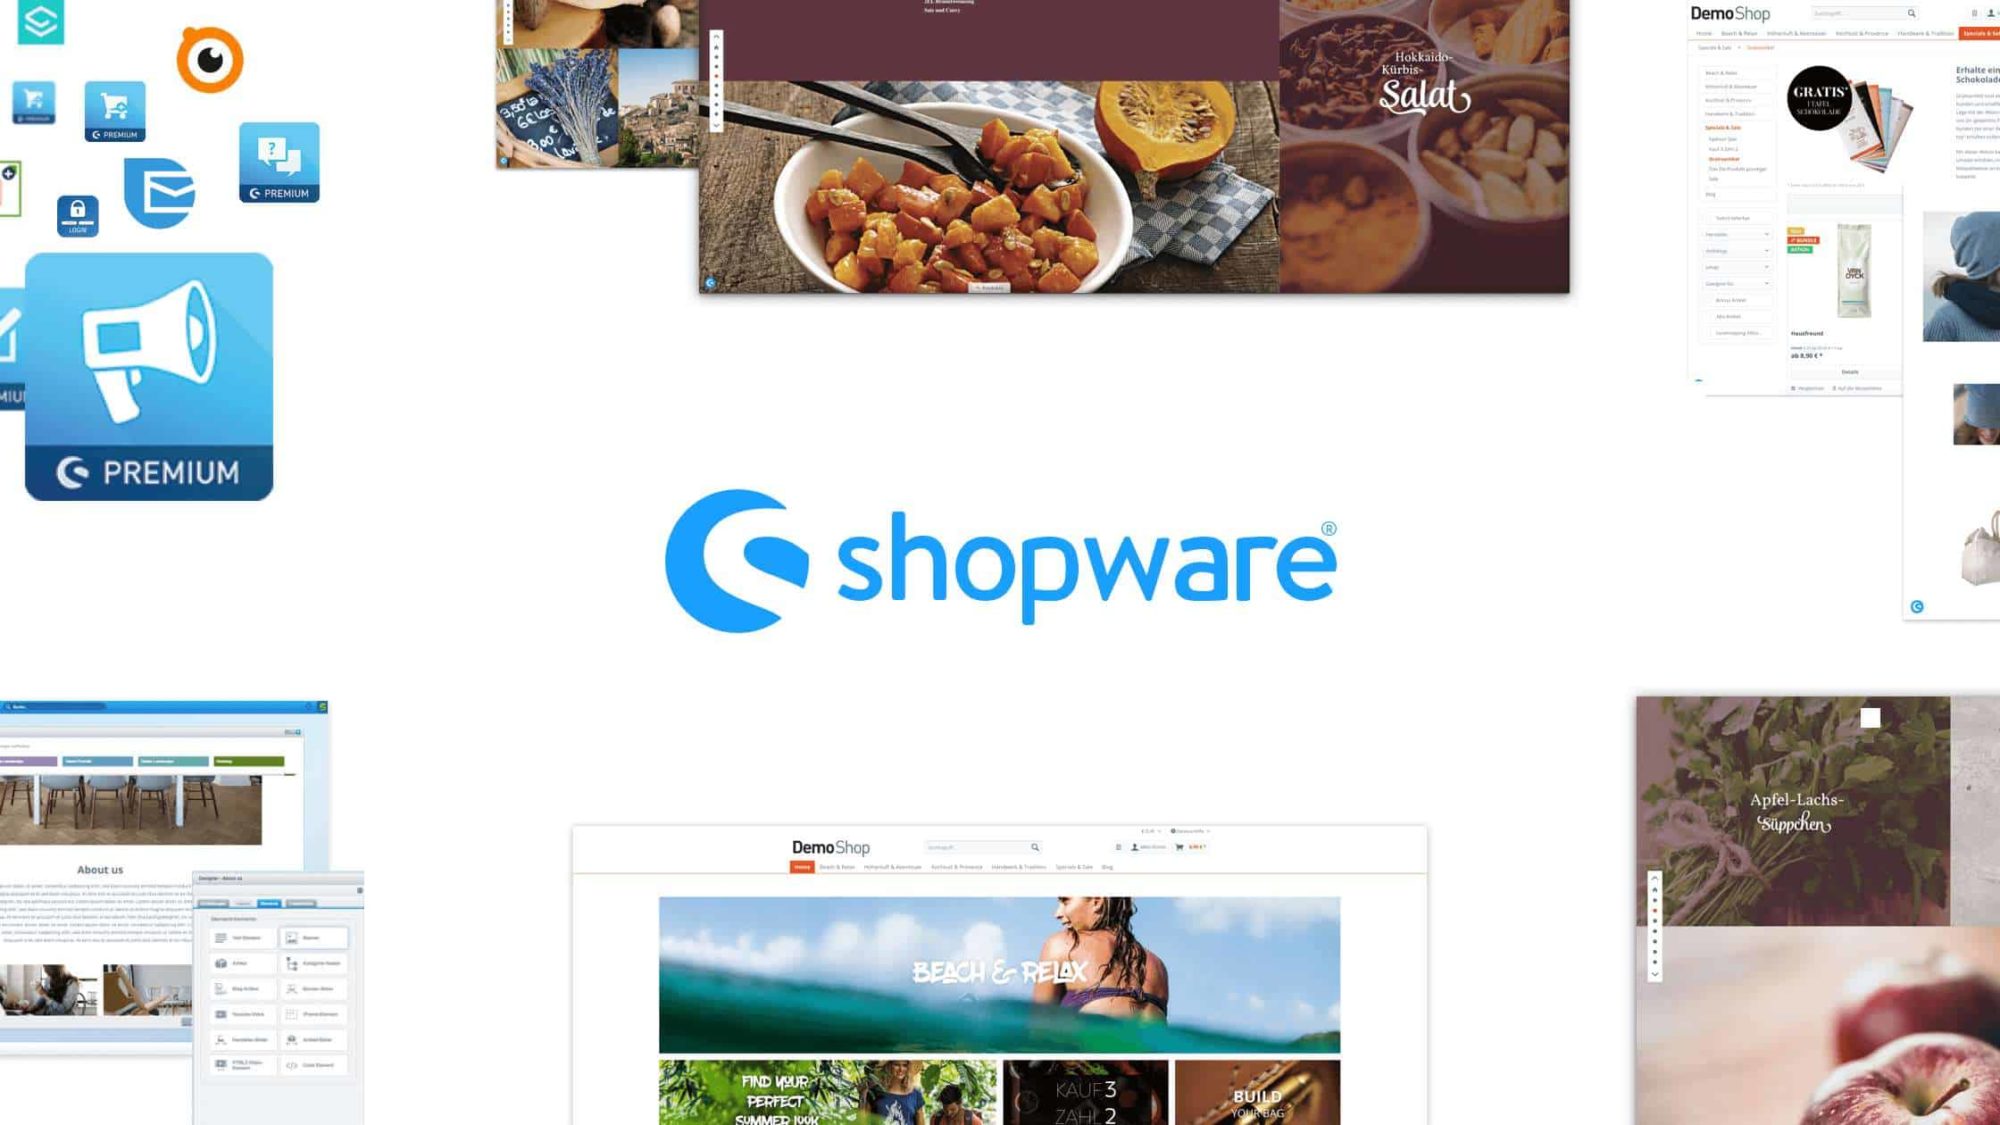 Shopware appoints Chief Product and Technology Officer